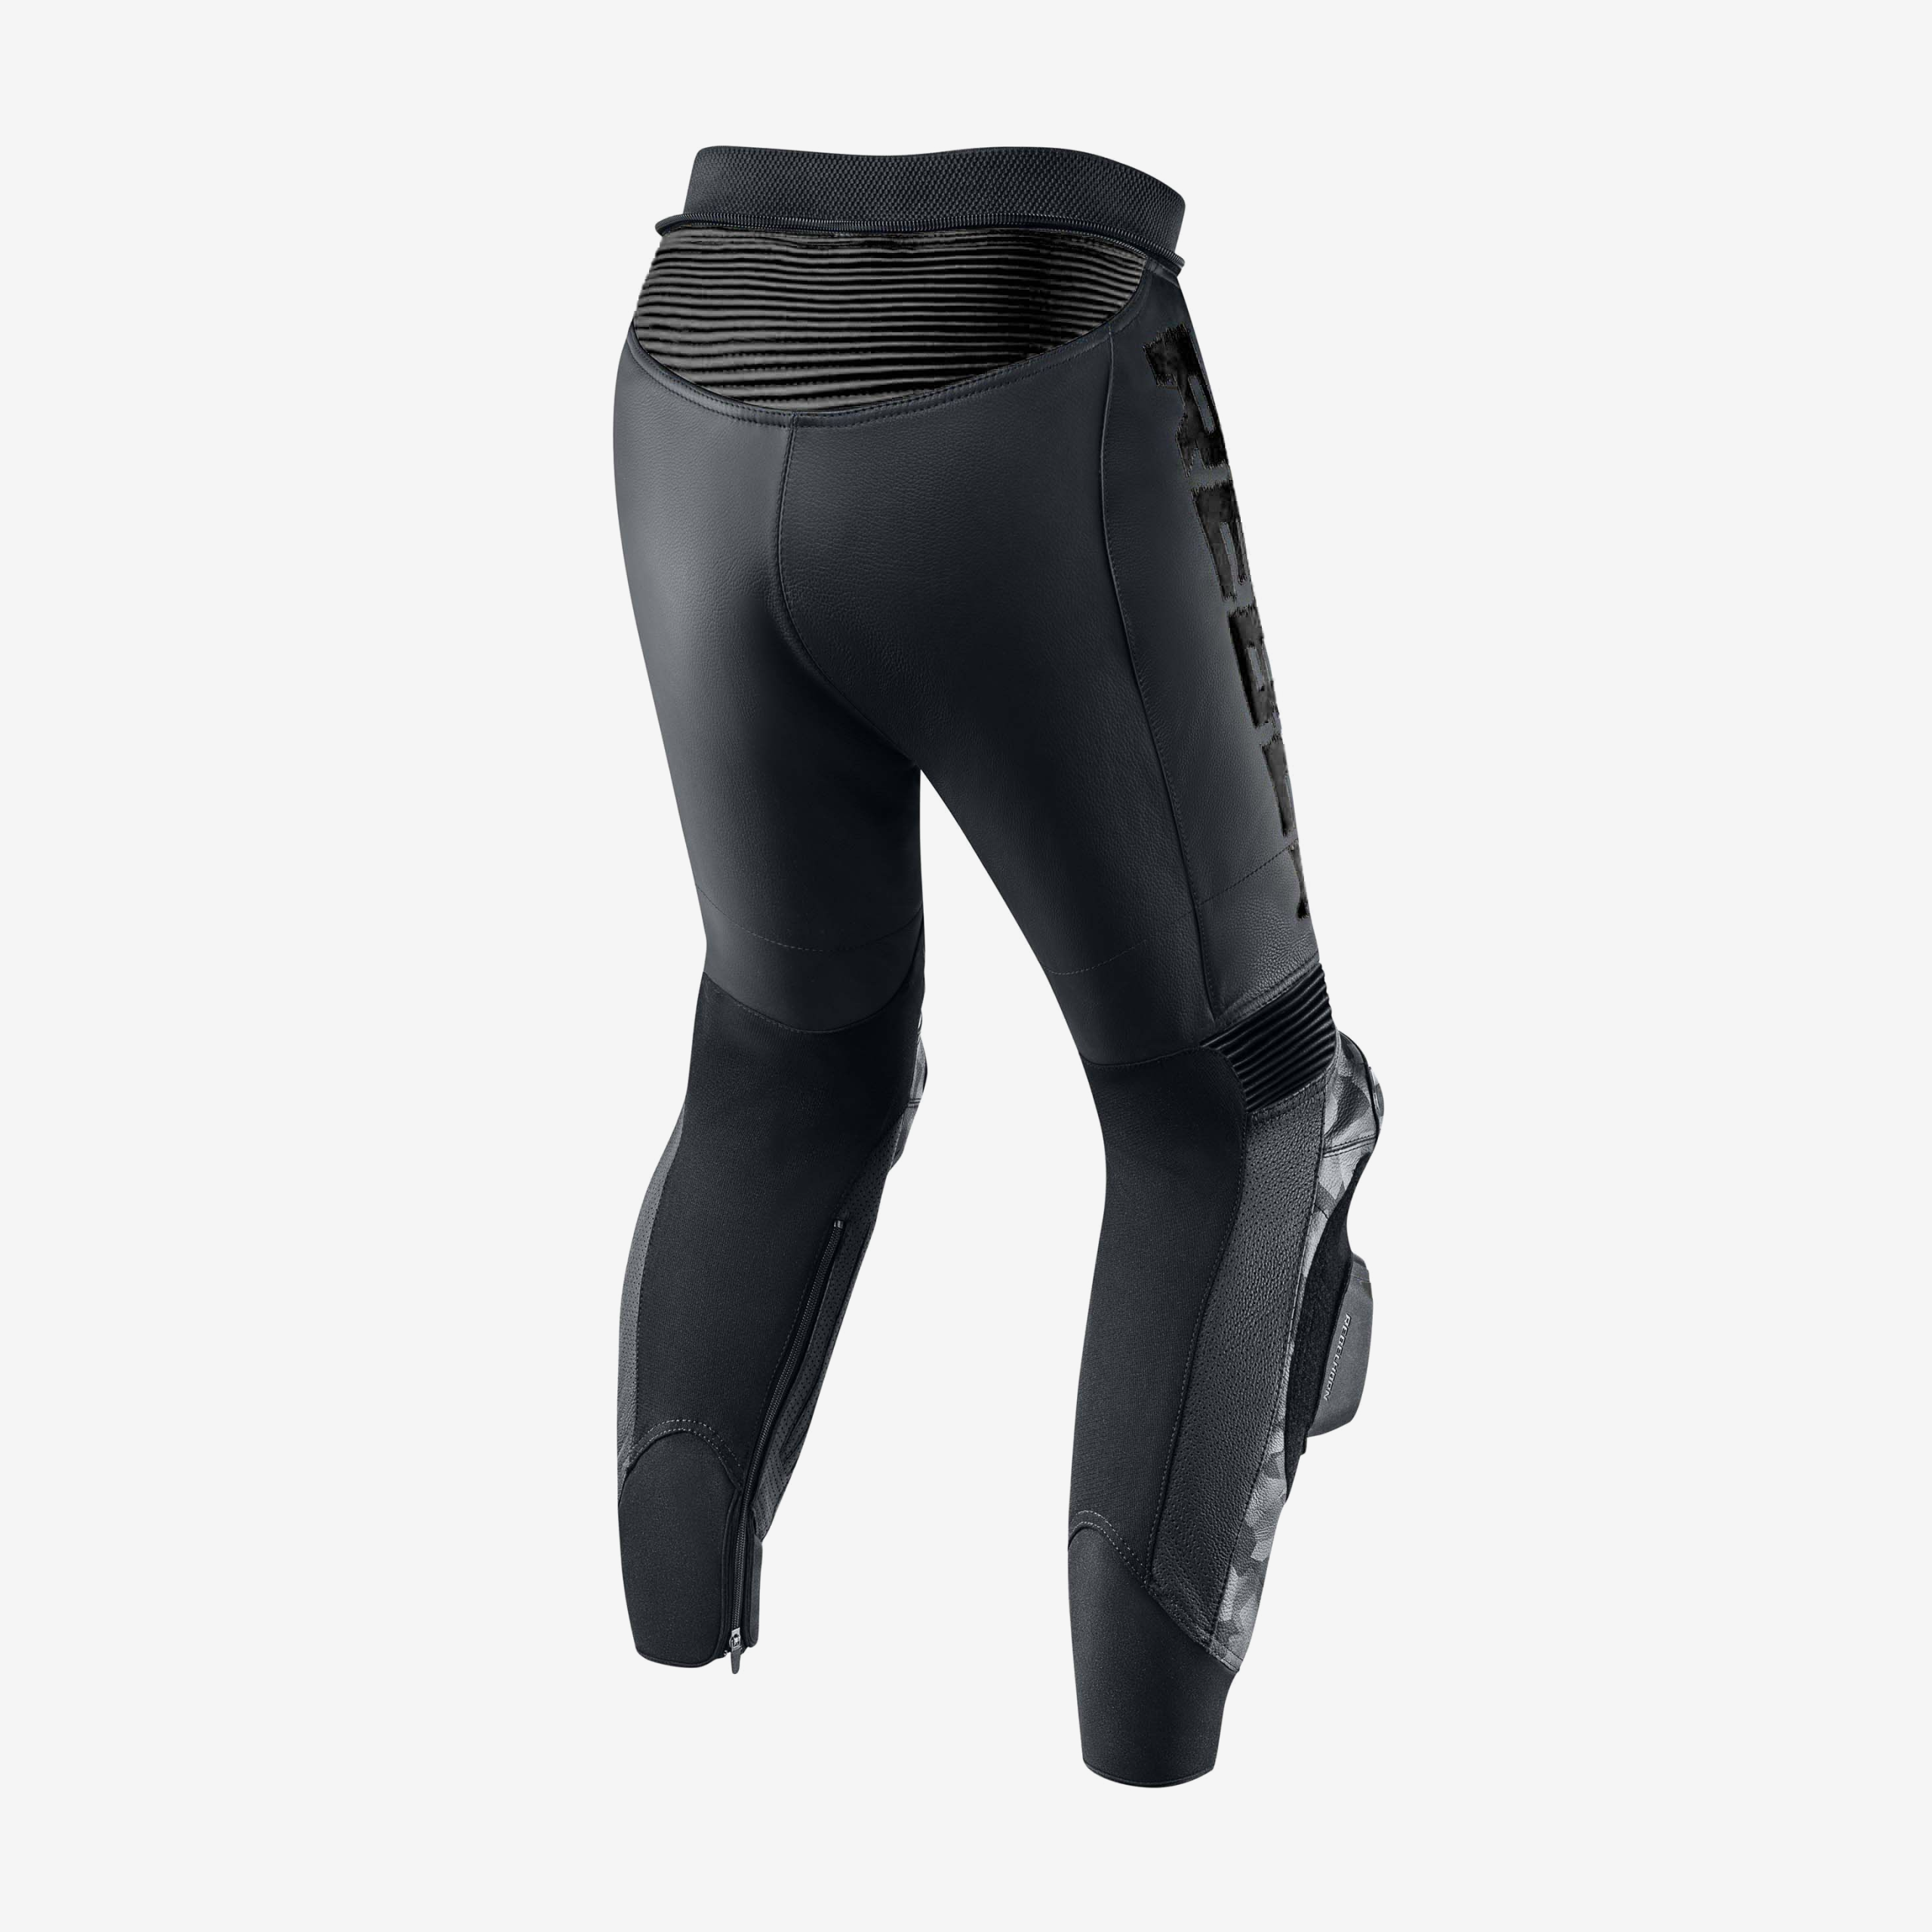 Buy REV'IT! Ignition 3 Pants from £178.28 (Today) – Best Deals on  idealo.co.uk